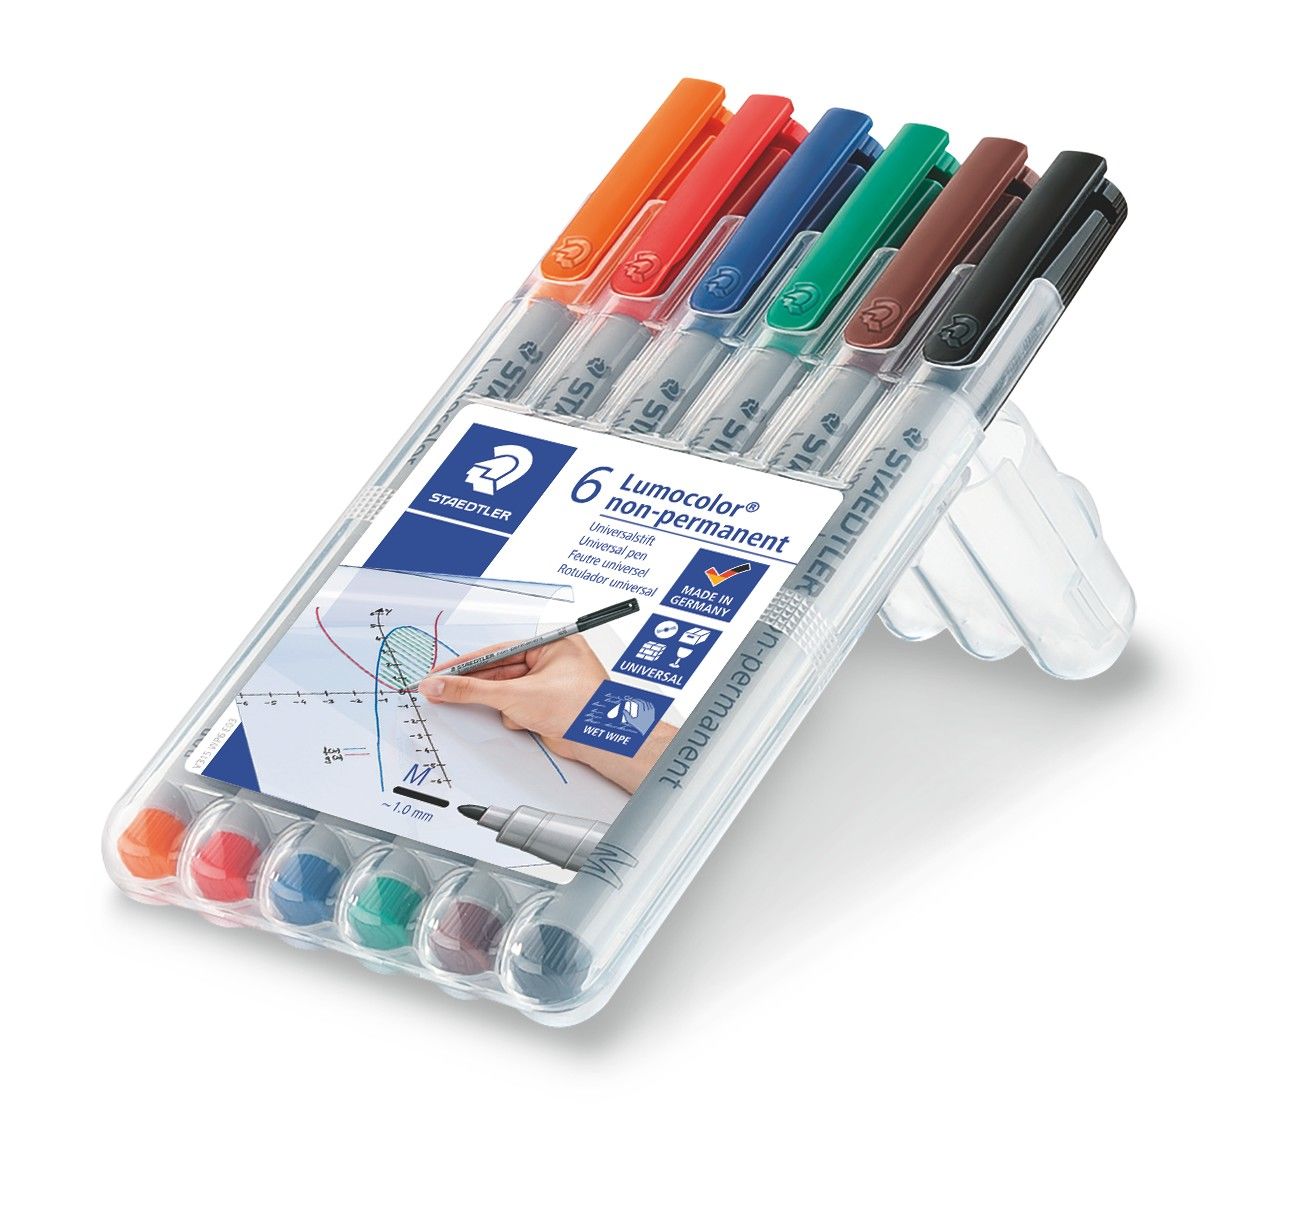 Marker: 6-Pack Water Soluble